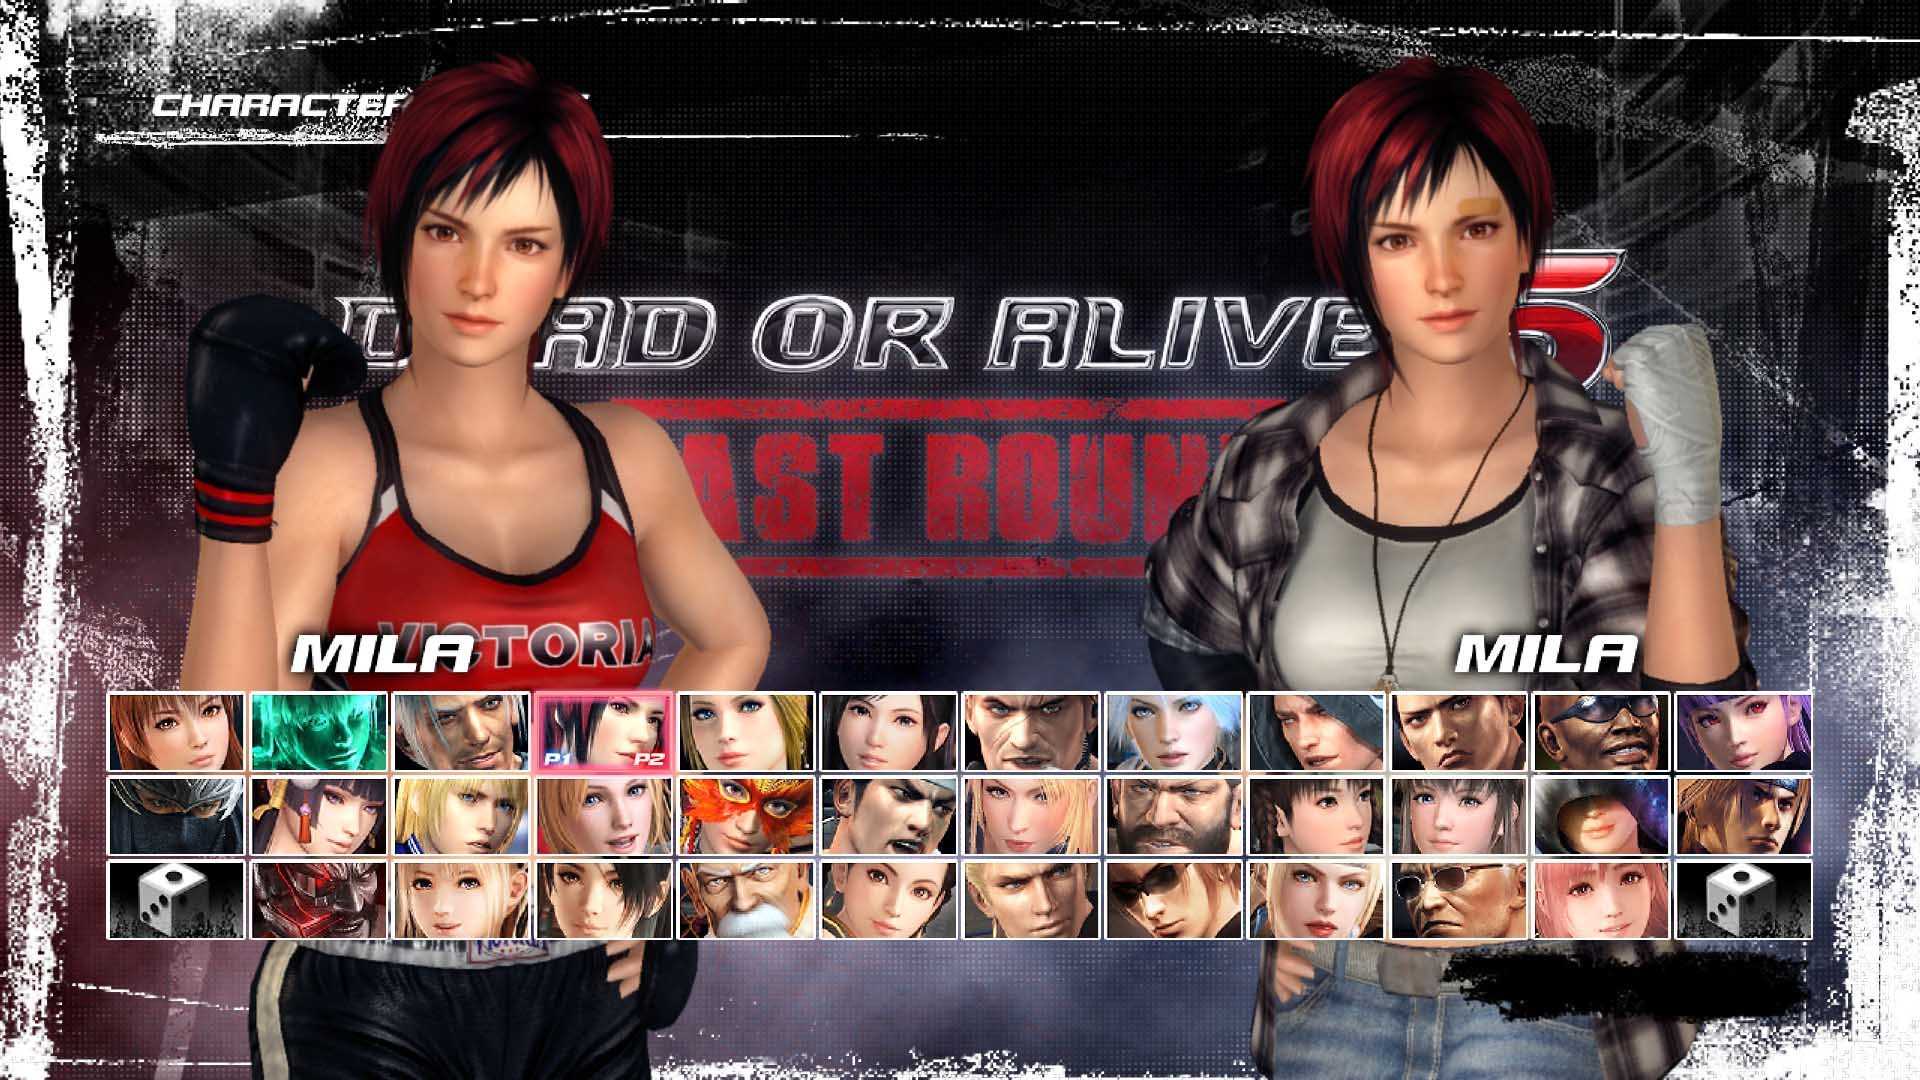 download dead or alive 5 last round core fighters for free